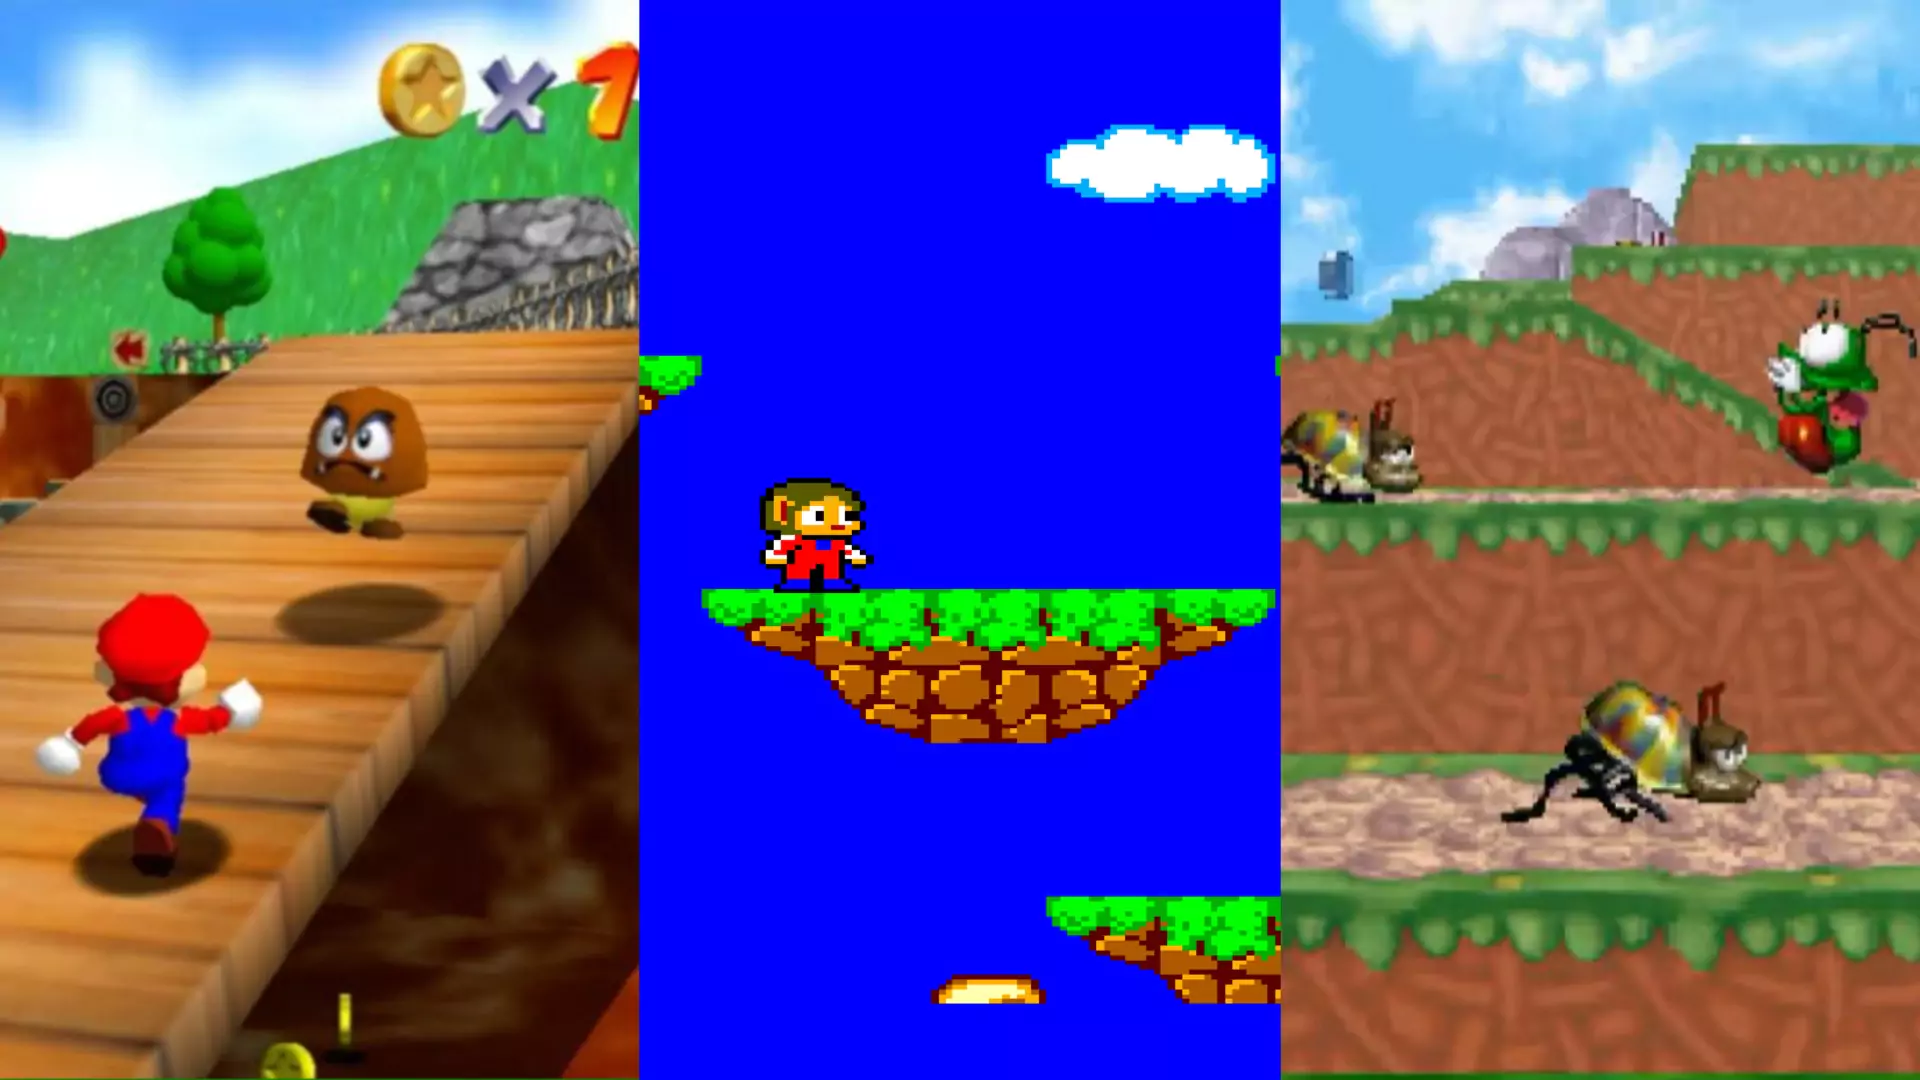 On the left is Mario running up a ramp towards a goomba, in the middle is a monkey-like boy standing on a floating island in Alex Kidd in Miracle Land, and on the right is a green bug jumping on another green bug in Bug!